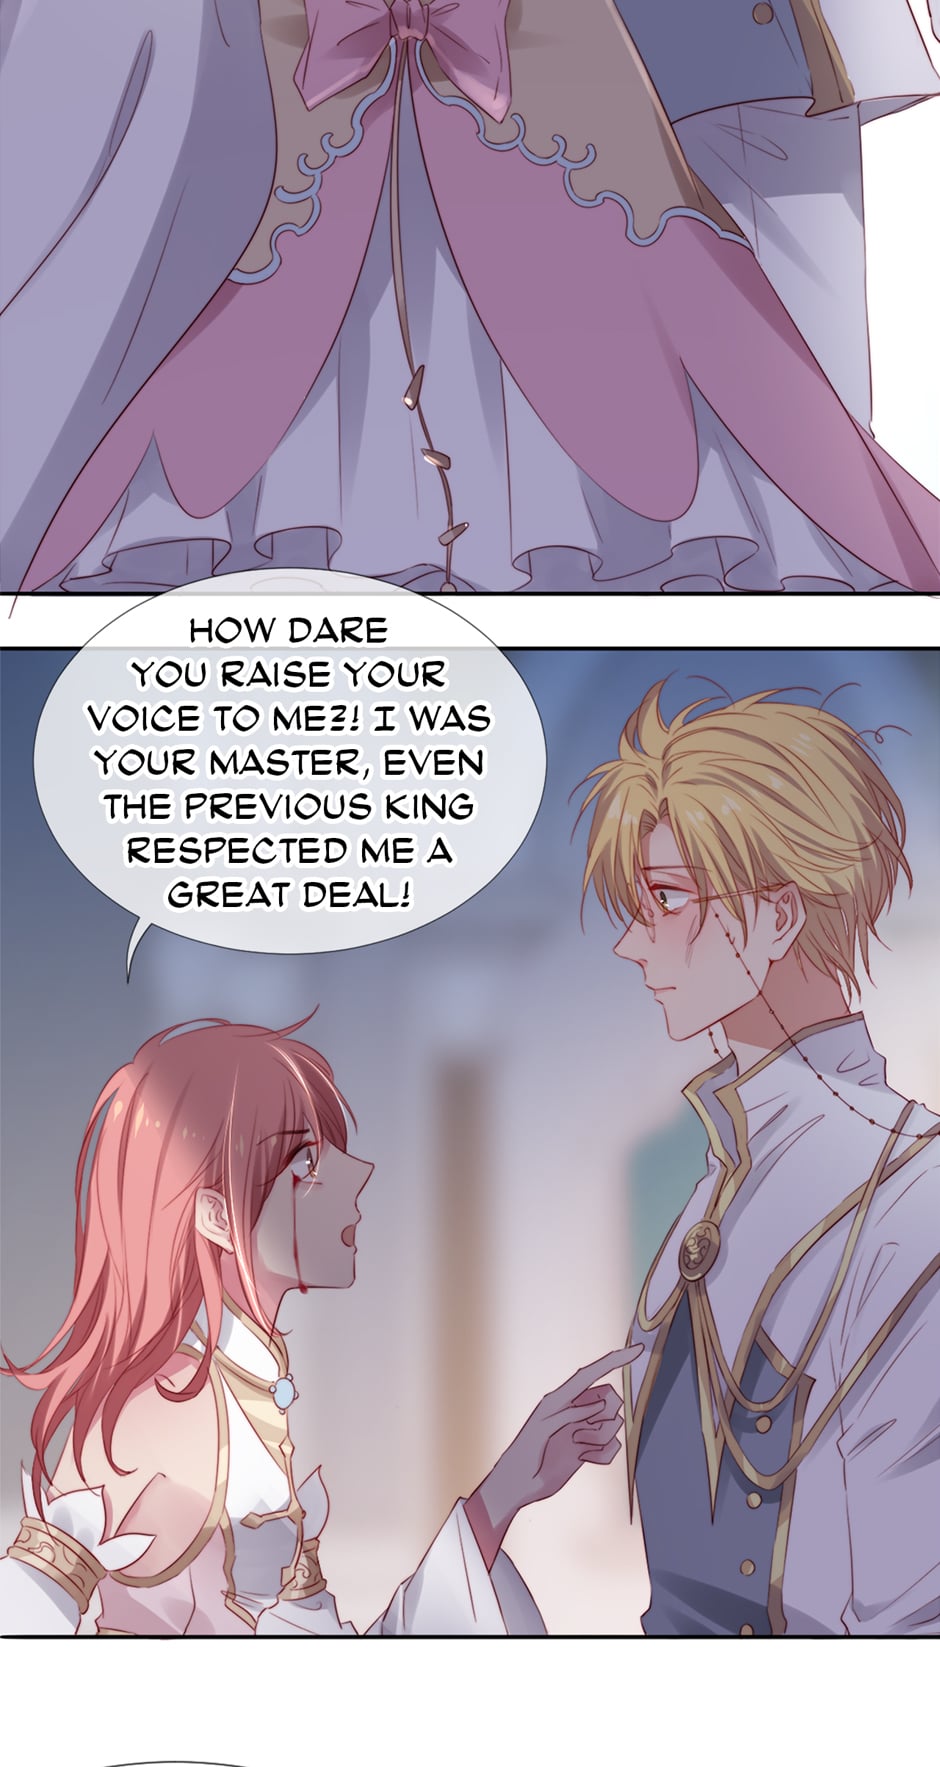 The Queen's Knights Ch.17